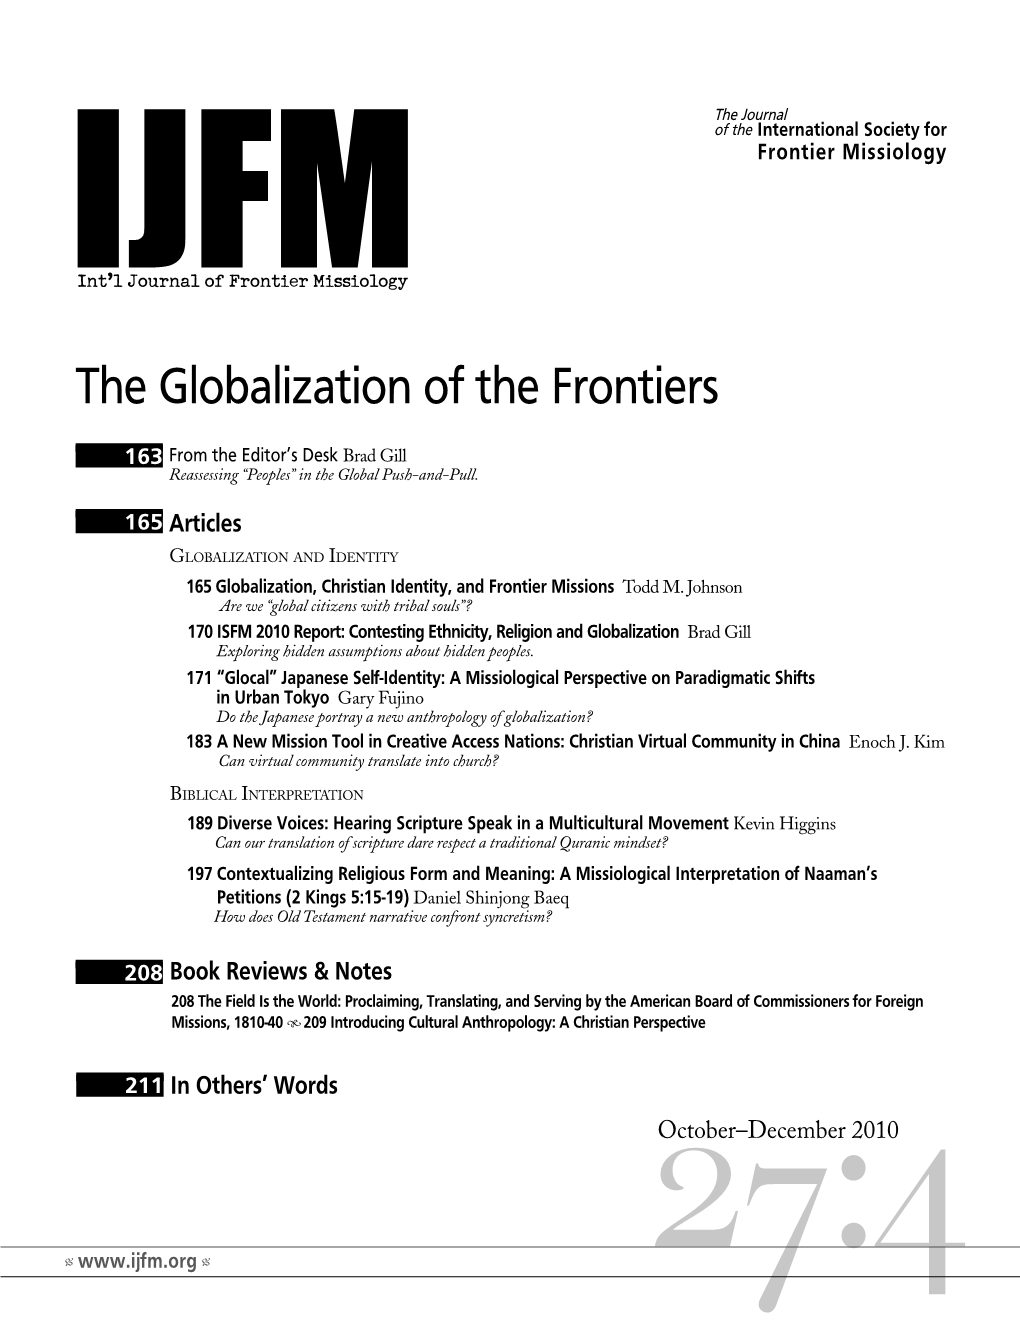 The Globalization of the Frontiers